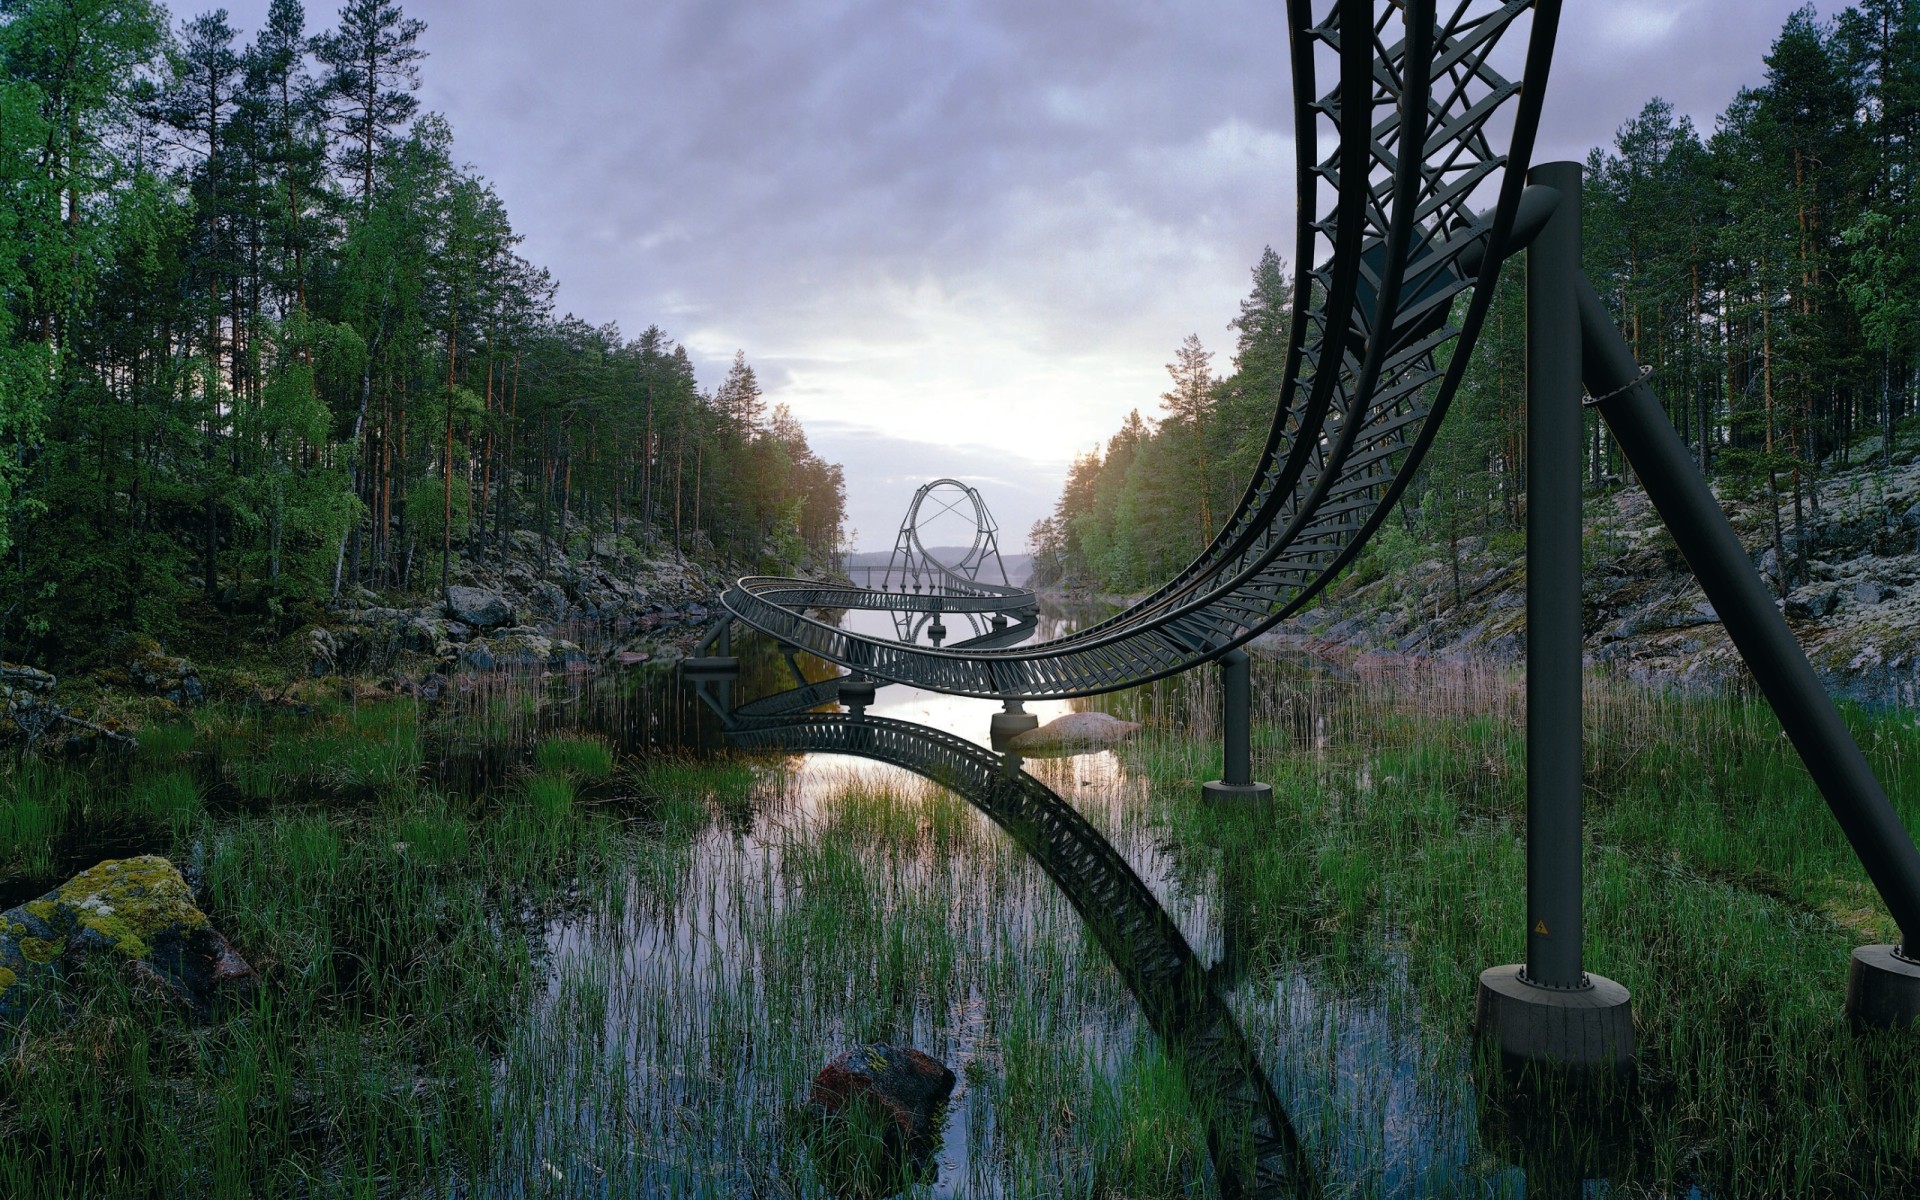 A roller coaster ride takes place in the woods above the lake